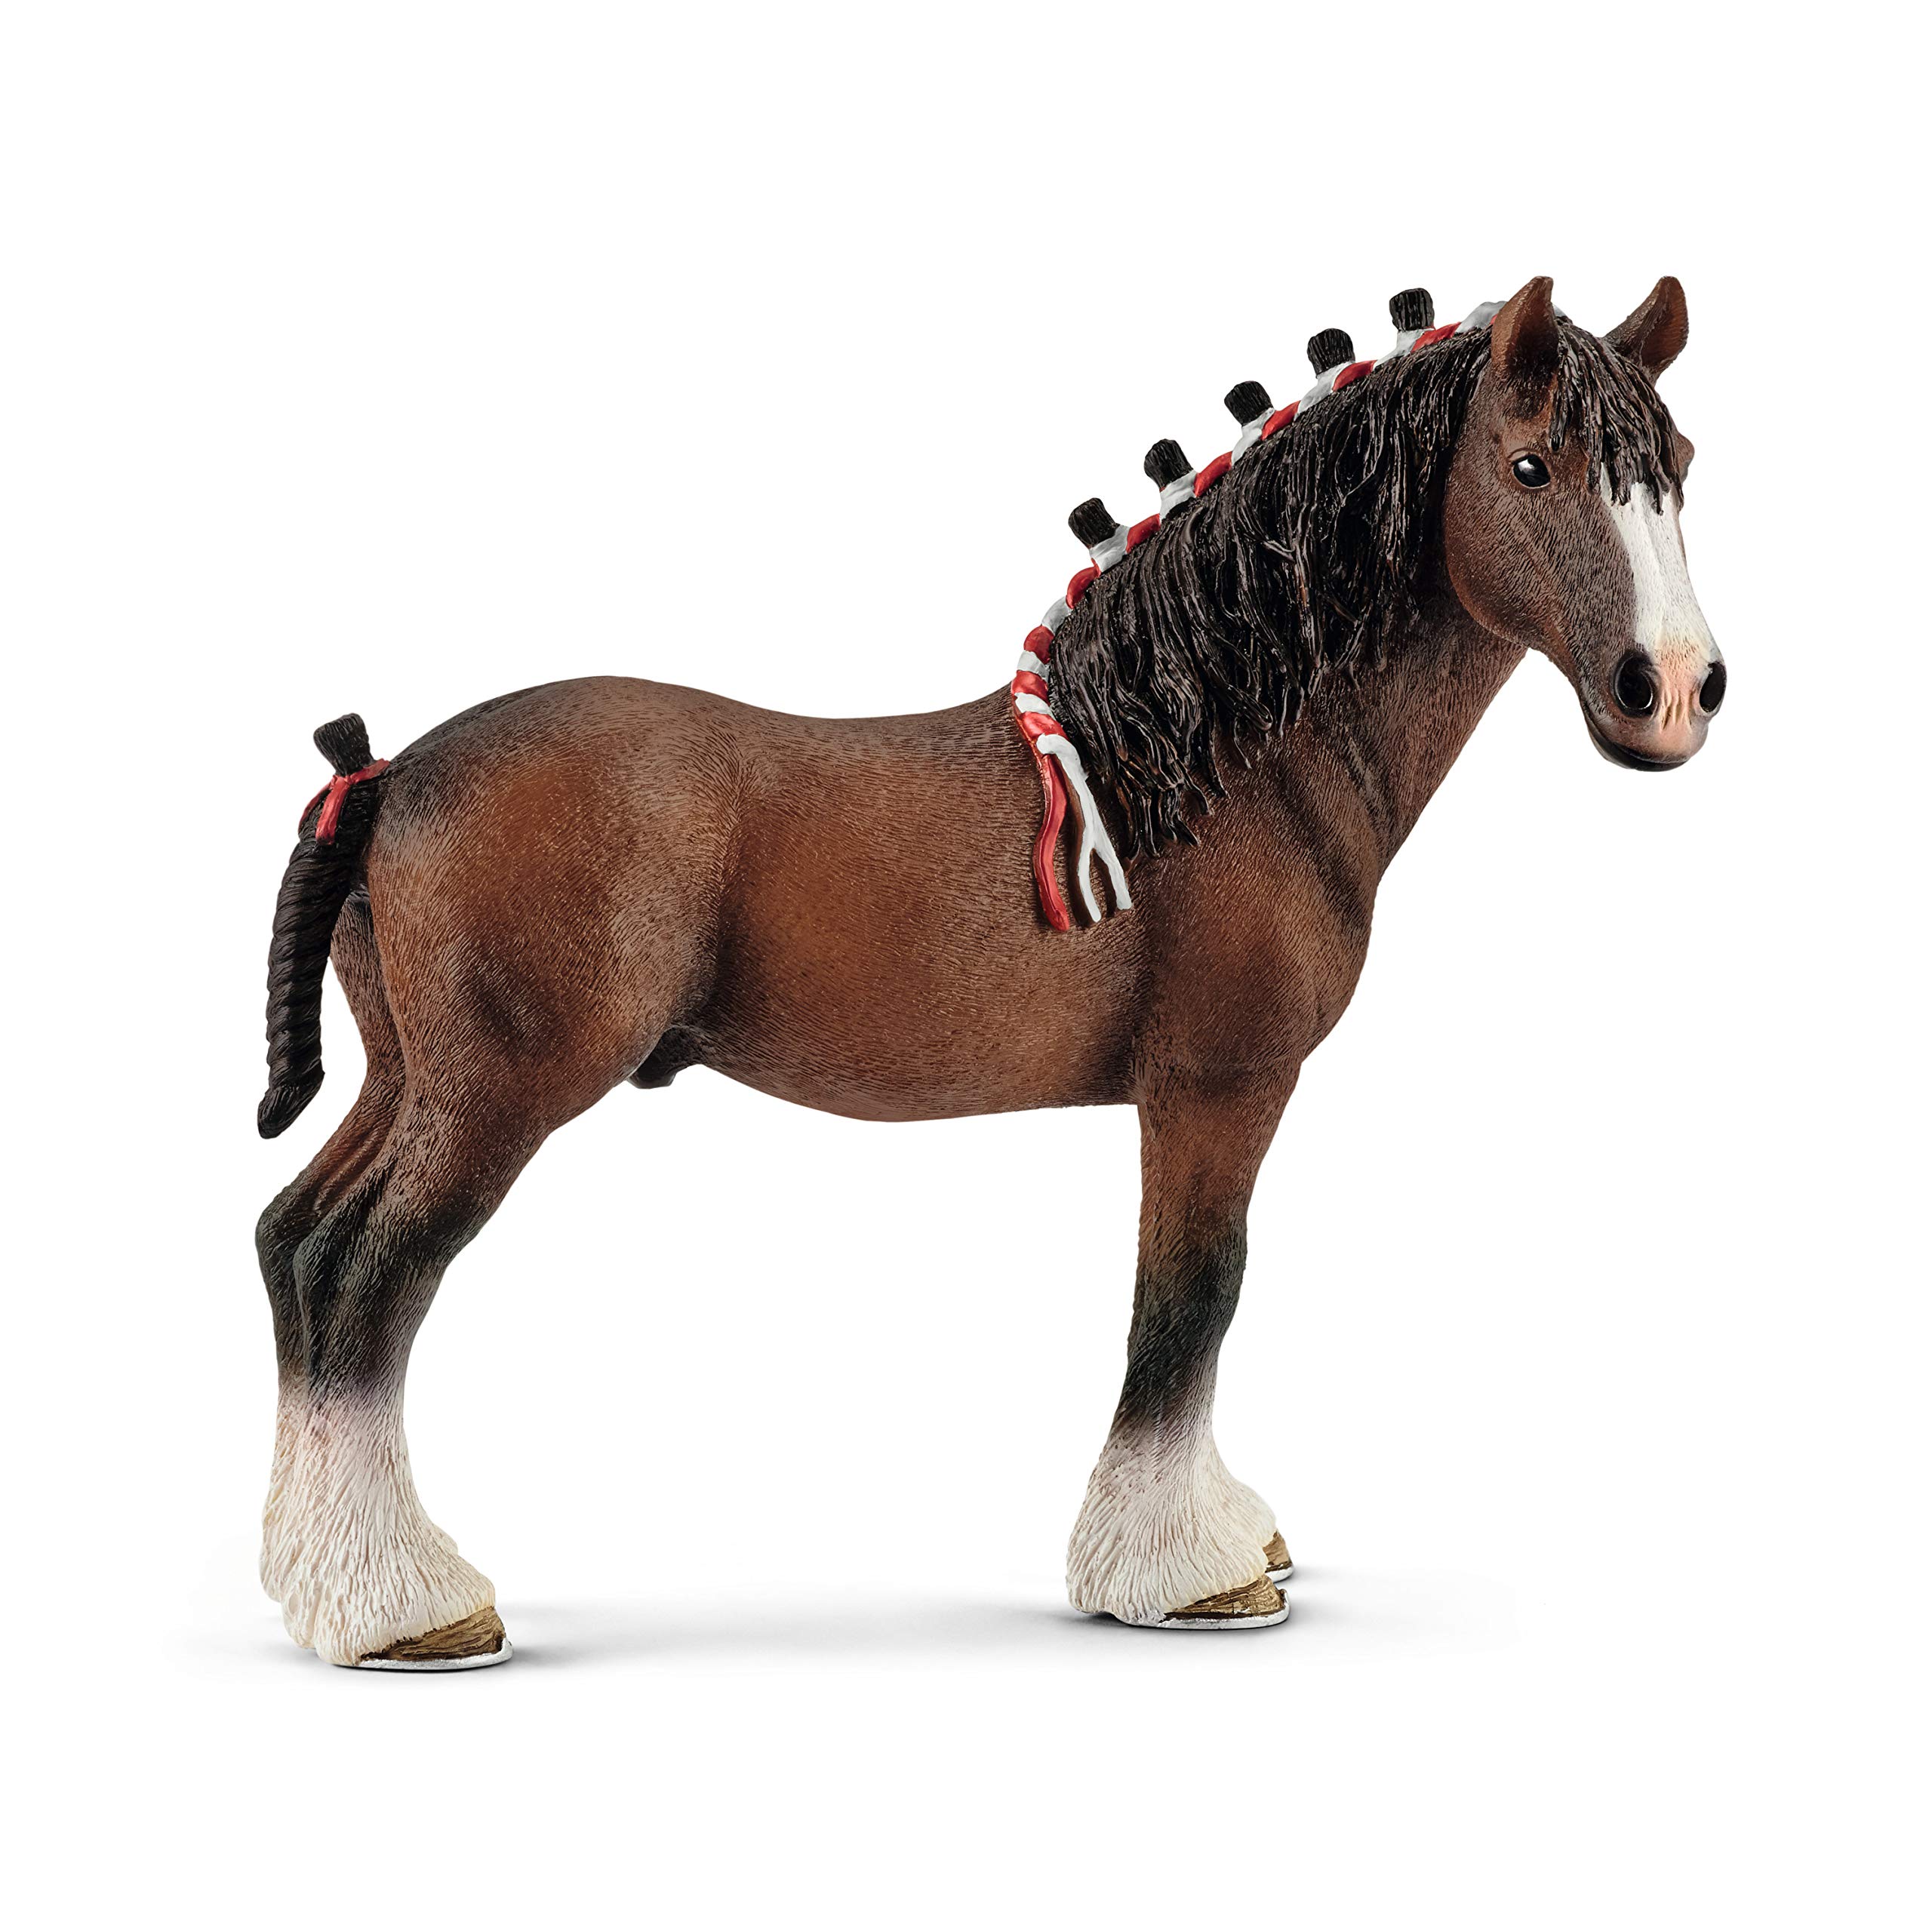 Schleich Farm World, Realistic Horse Toys for Girls and Boys, Clydesdale Gelding Horse Figurine, Ages 3+